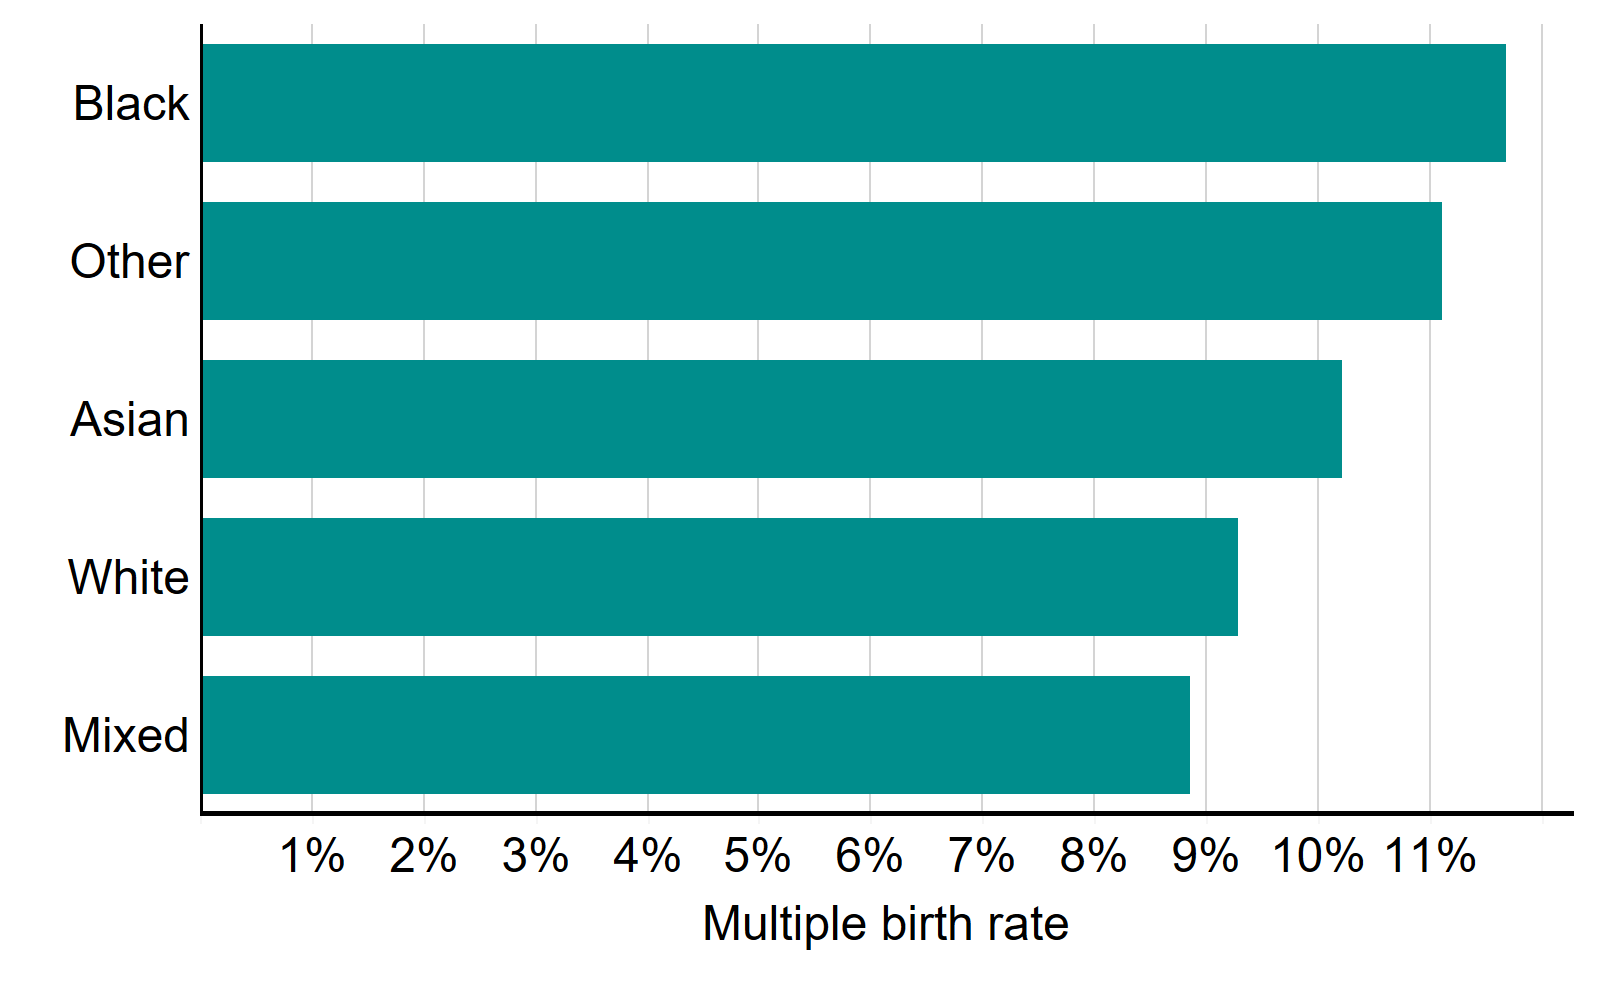 Figure 6: Average live multiple birth rate by patient ethnicity, 2015-2019. Average live multiple birth rate by patient ethnicity, 2015-2019. This bar chart shows the average multiple birth rate by patient ethnic group; Asian, Black, Mixed, Other and White, from 2015-2019. Patients of Black and Other ethnicities experience higher multiple birth rates around 11-12%. White and Mixed ethnicity patients experience lower than average multiple birth rates around 9%. An accessible form of the underlying data for this figure can be downloaded beneath the image in .xls format.